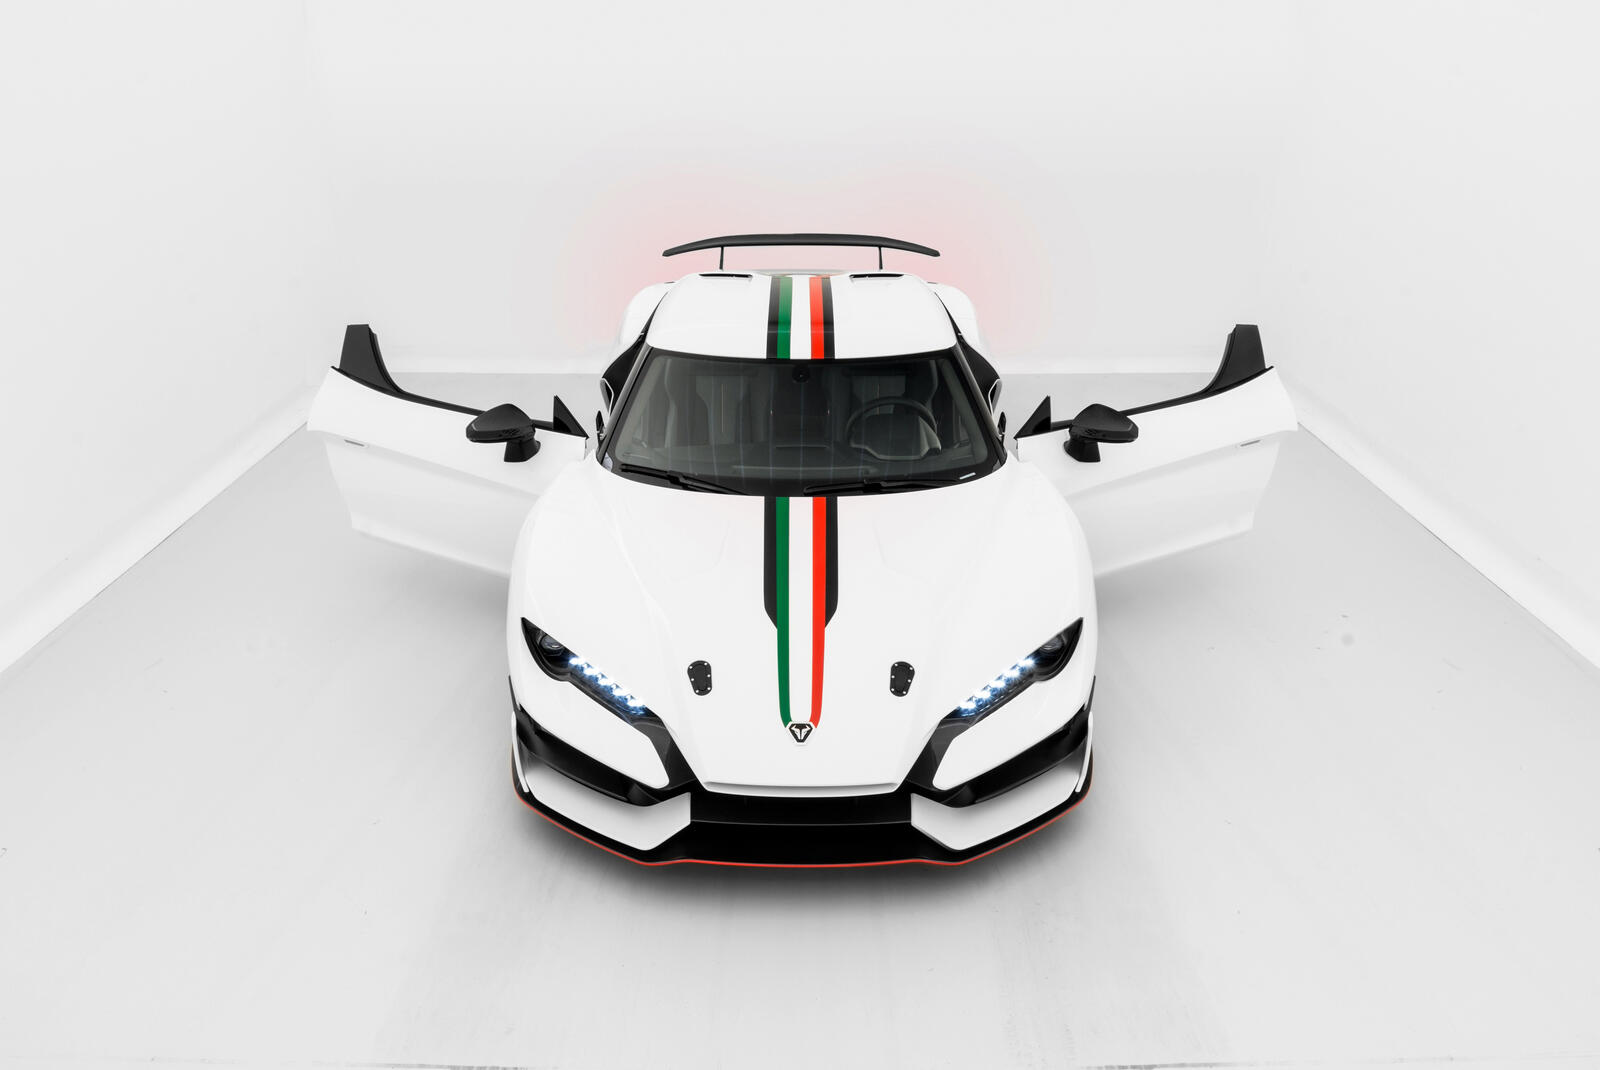 Free photo Italdesign Zerouno car in white with stripes on the hood with open doors